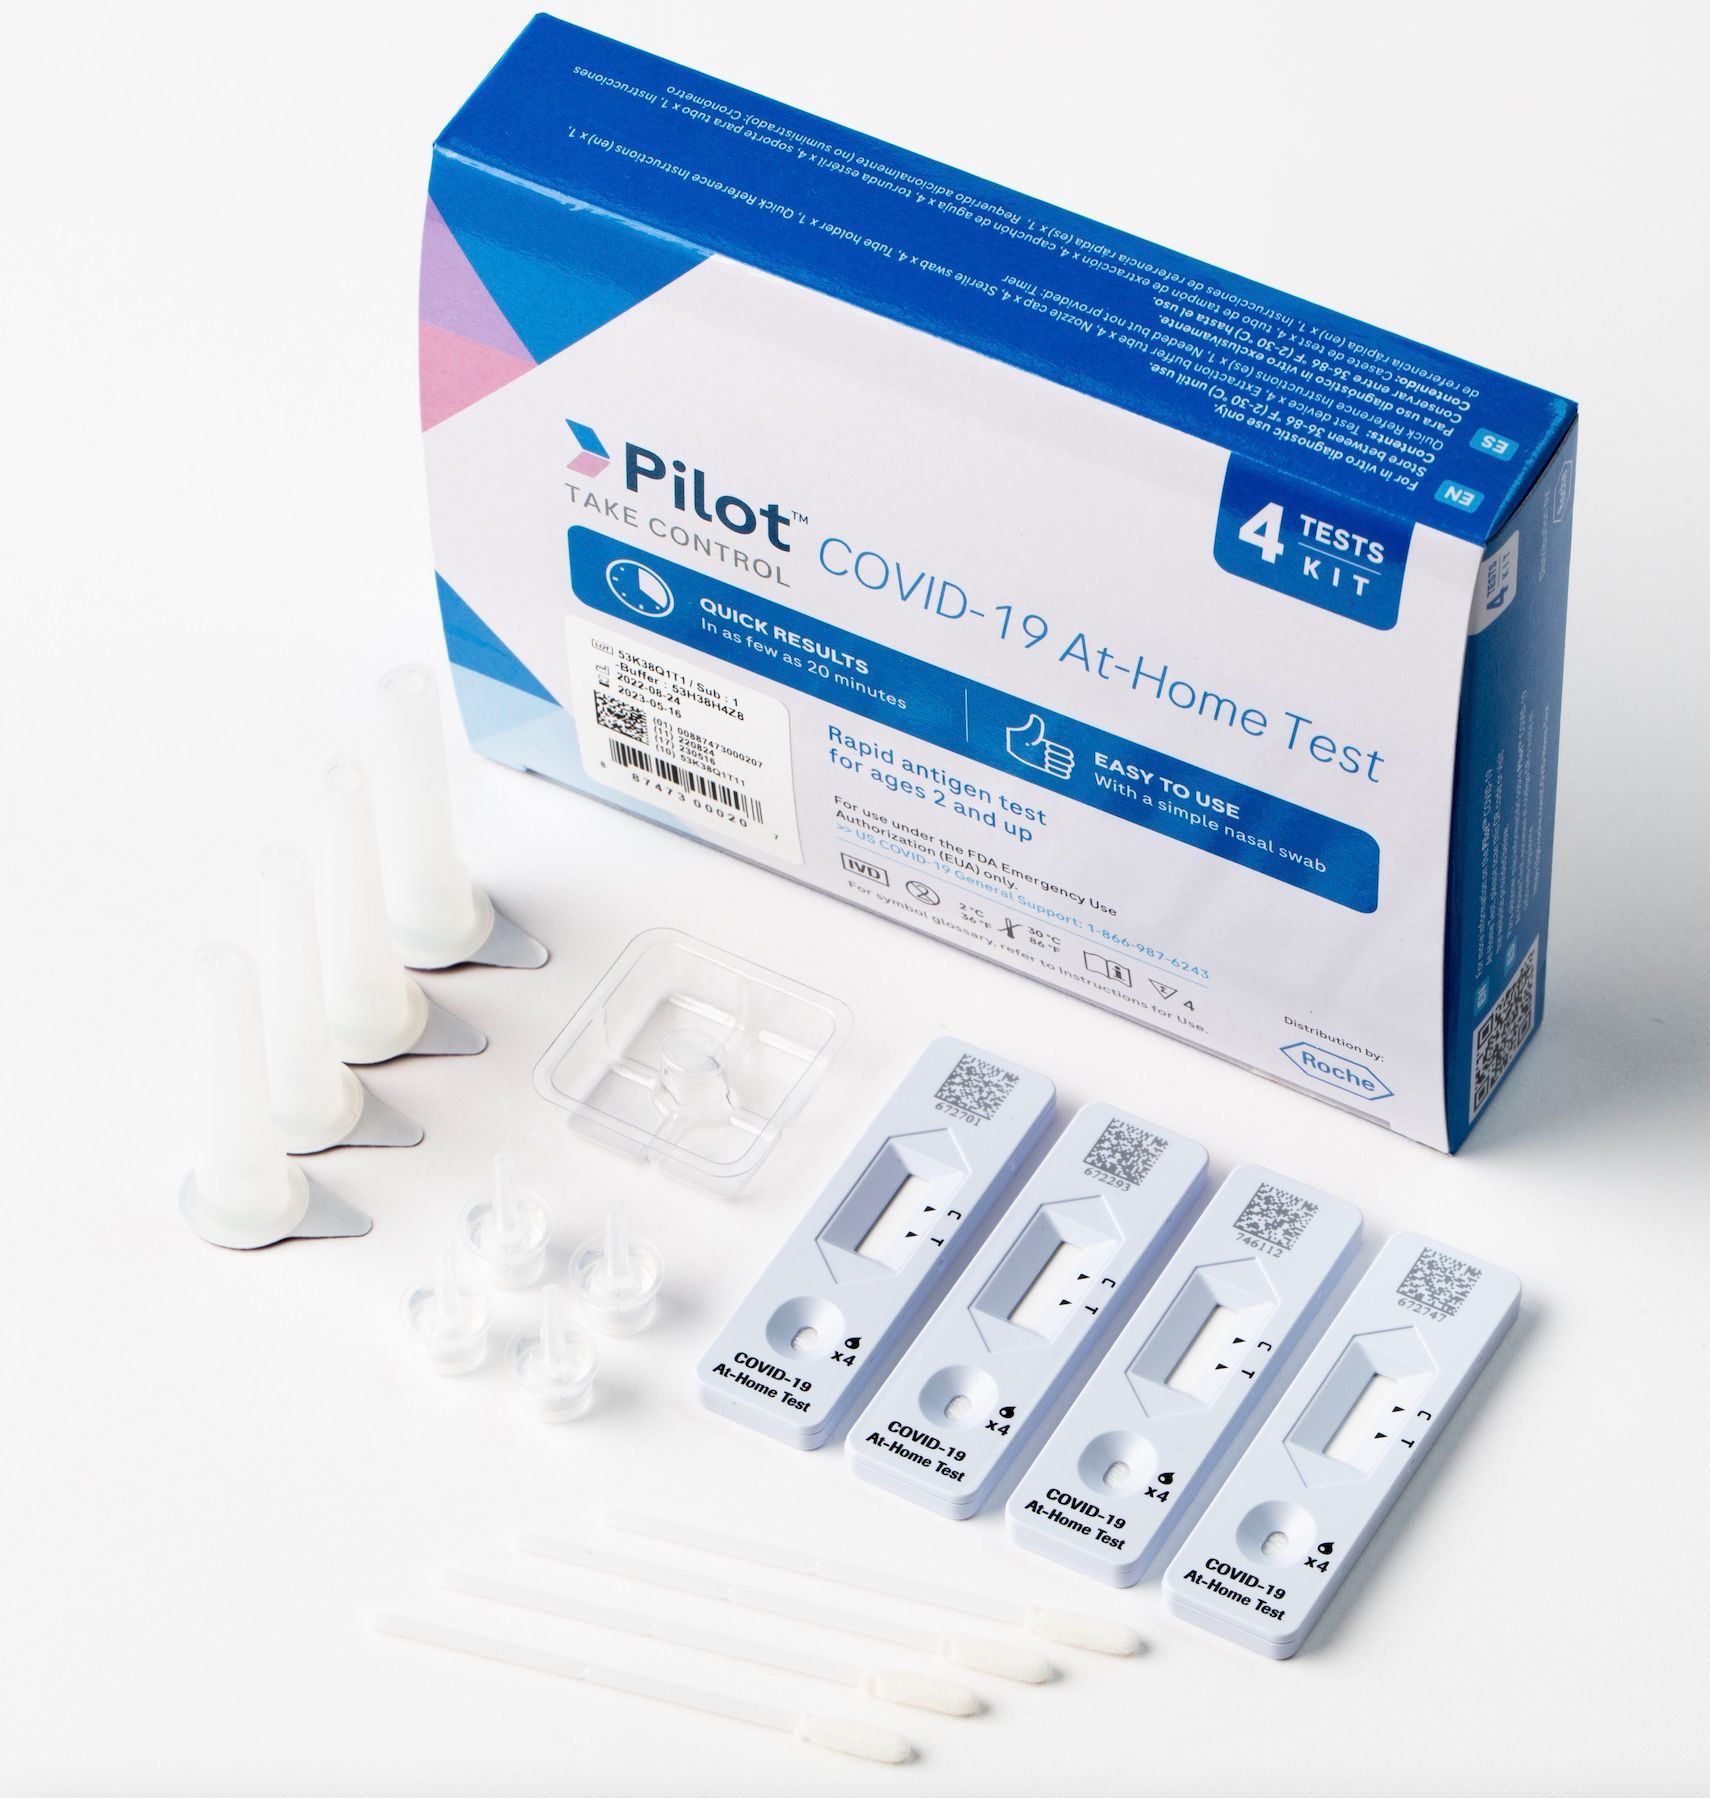 Limited Inventory: Pilot COVID-19 At-Home Test distributed by Roche, 4 tests (Insurance Eligible)